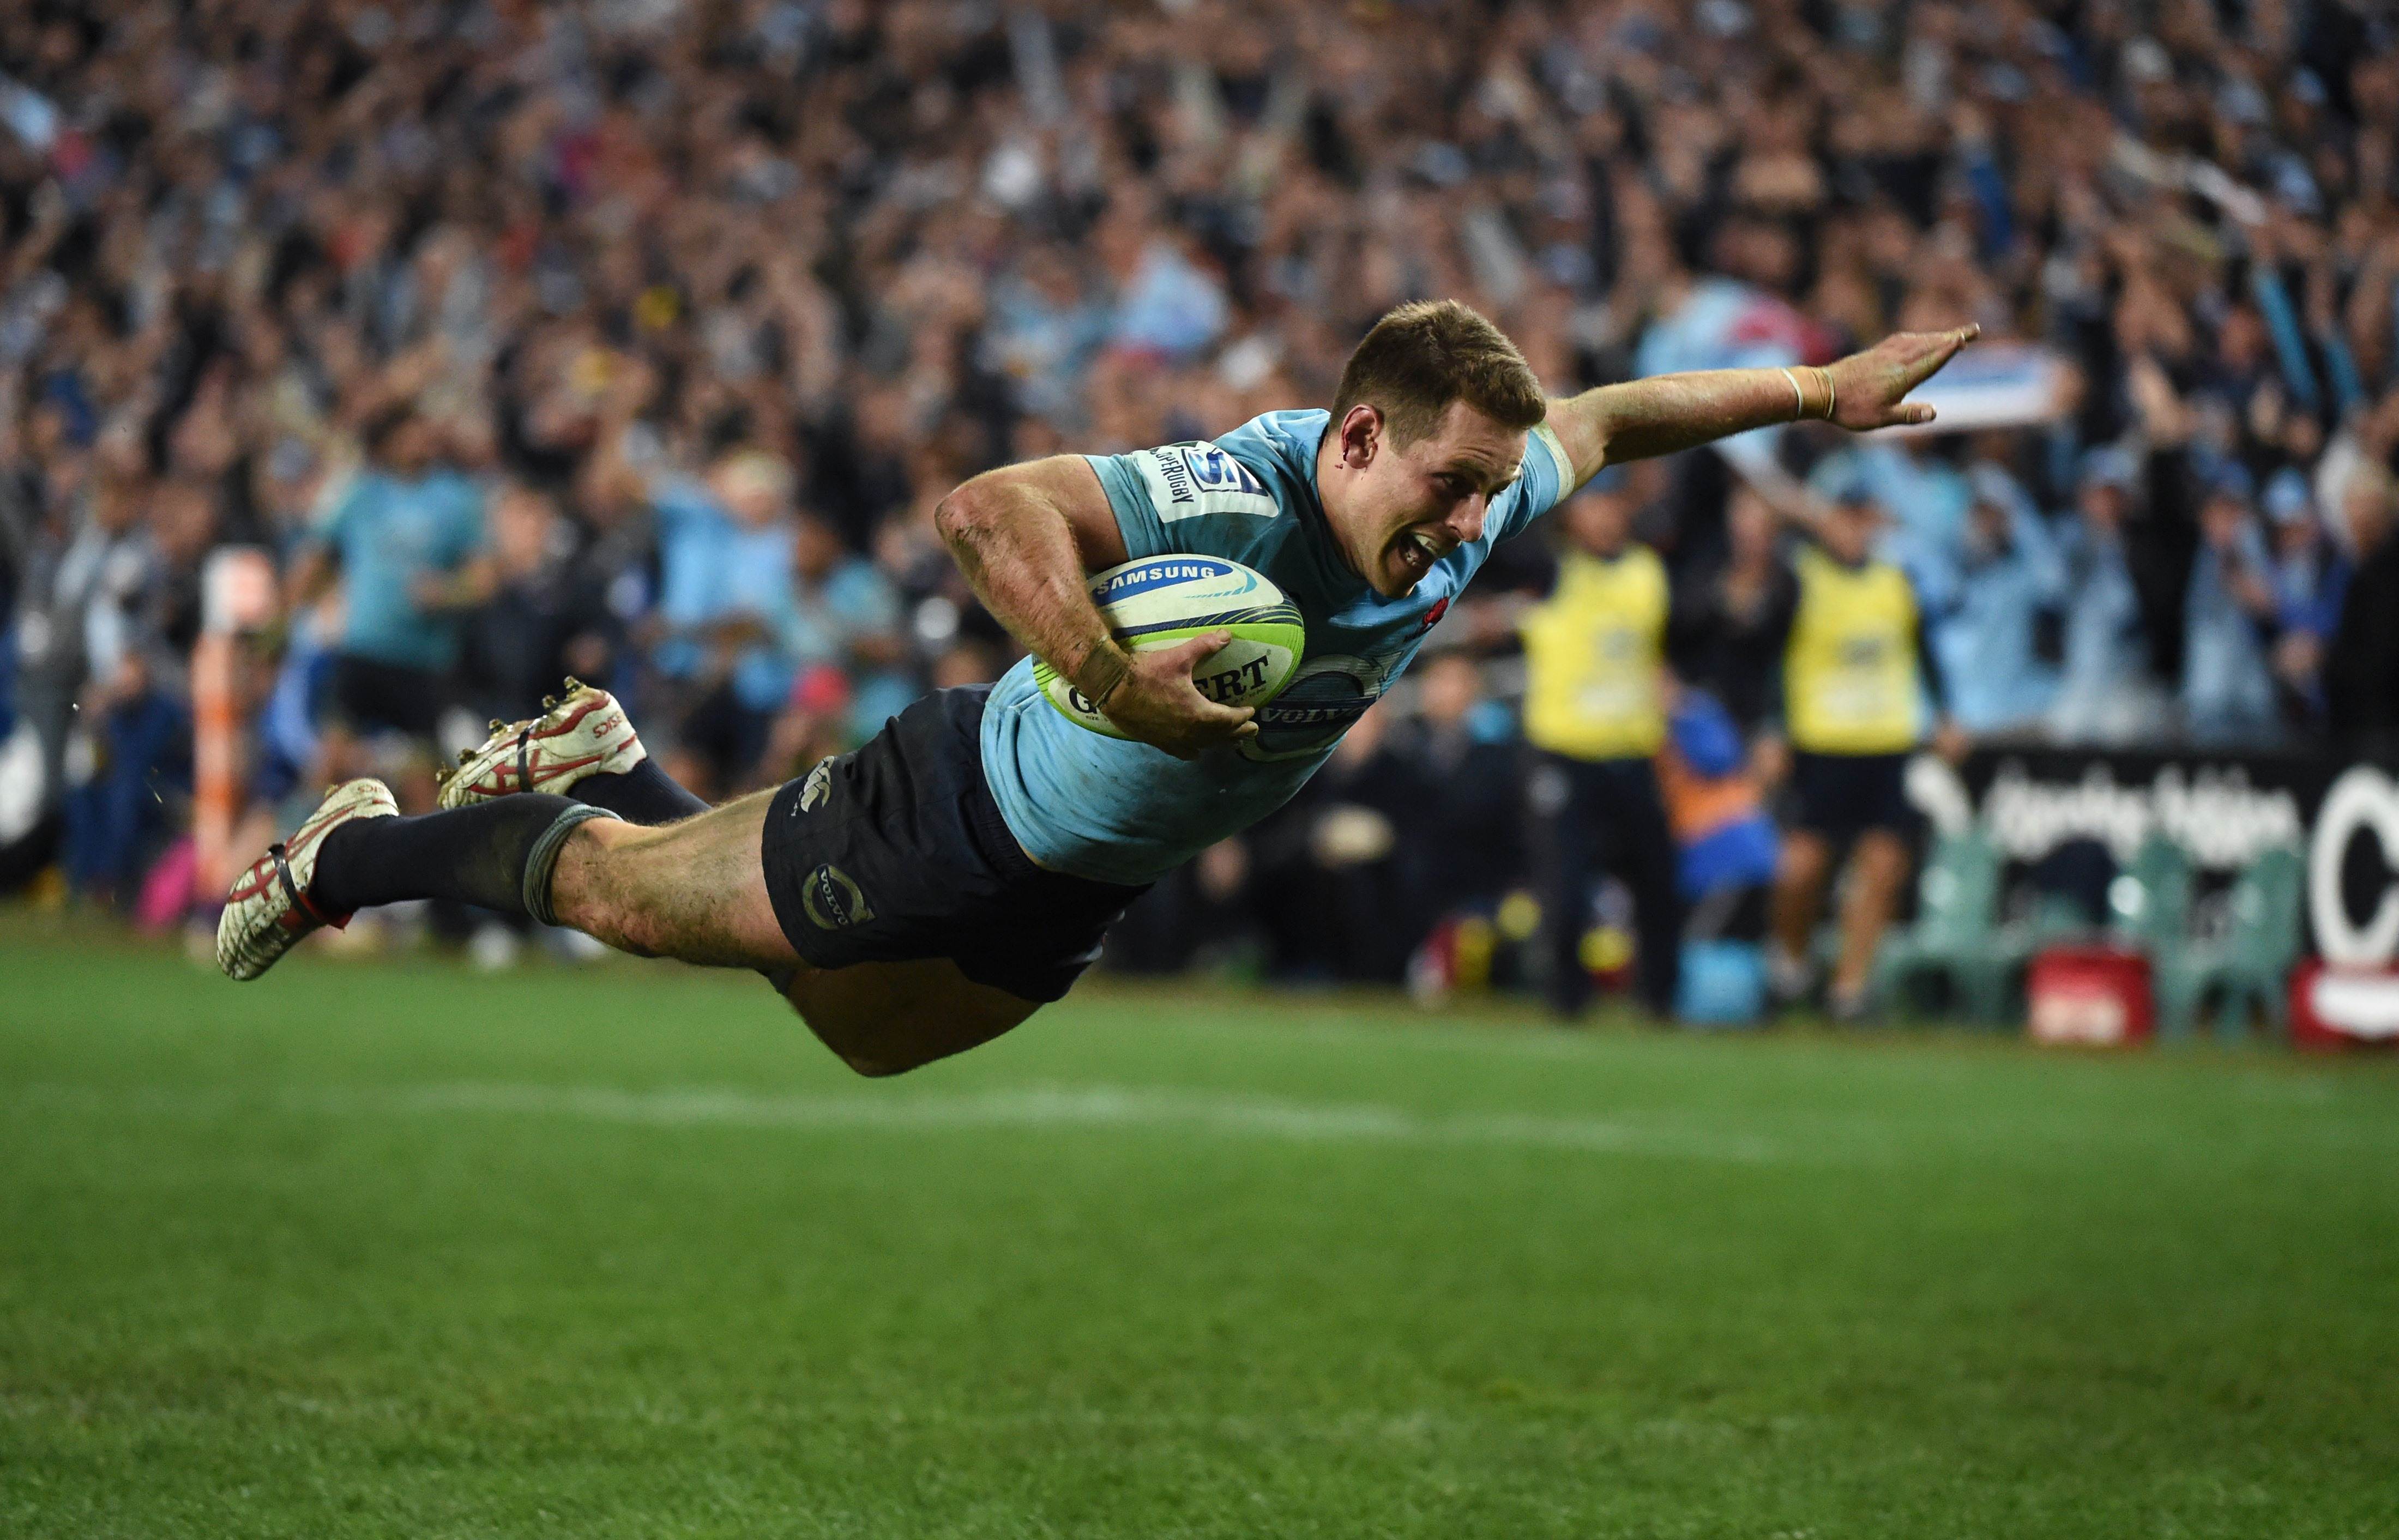 Waratahs fly-half Bernard Foley dives over to score against the Brumbies in their Super 15 semi-final in Sydney. Photo: AFP